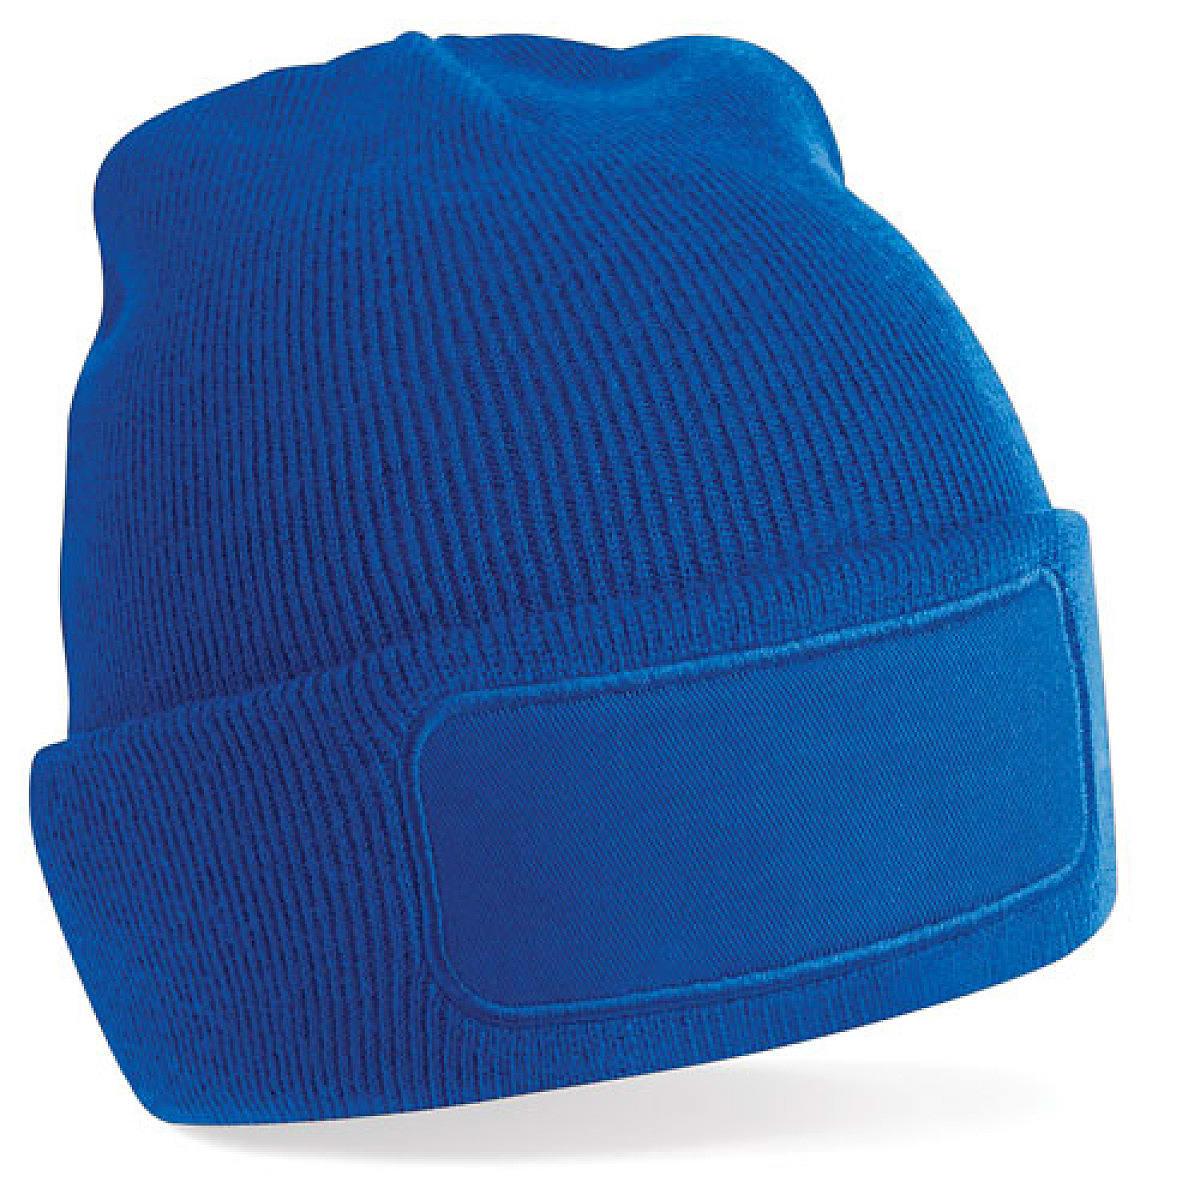 Beechfield Original Patch Beanie Hat in Bright Royal (Product Code: B445)